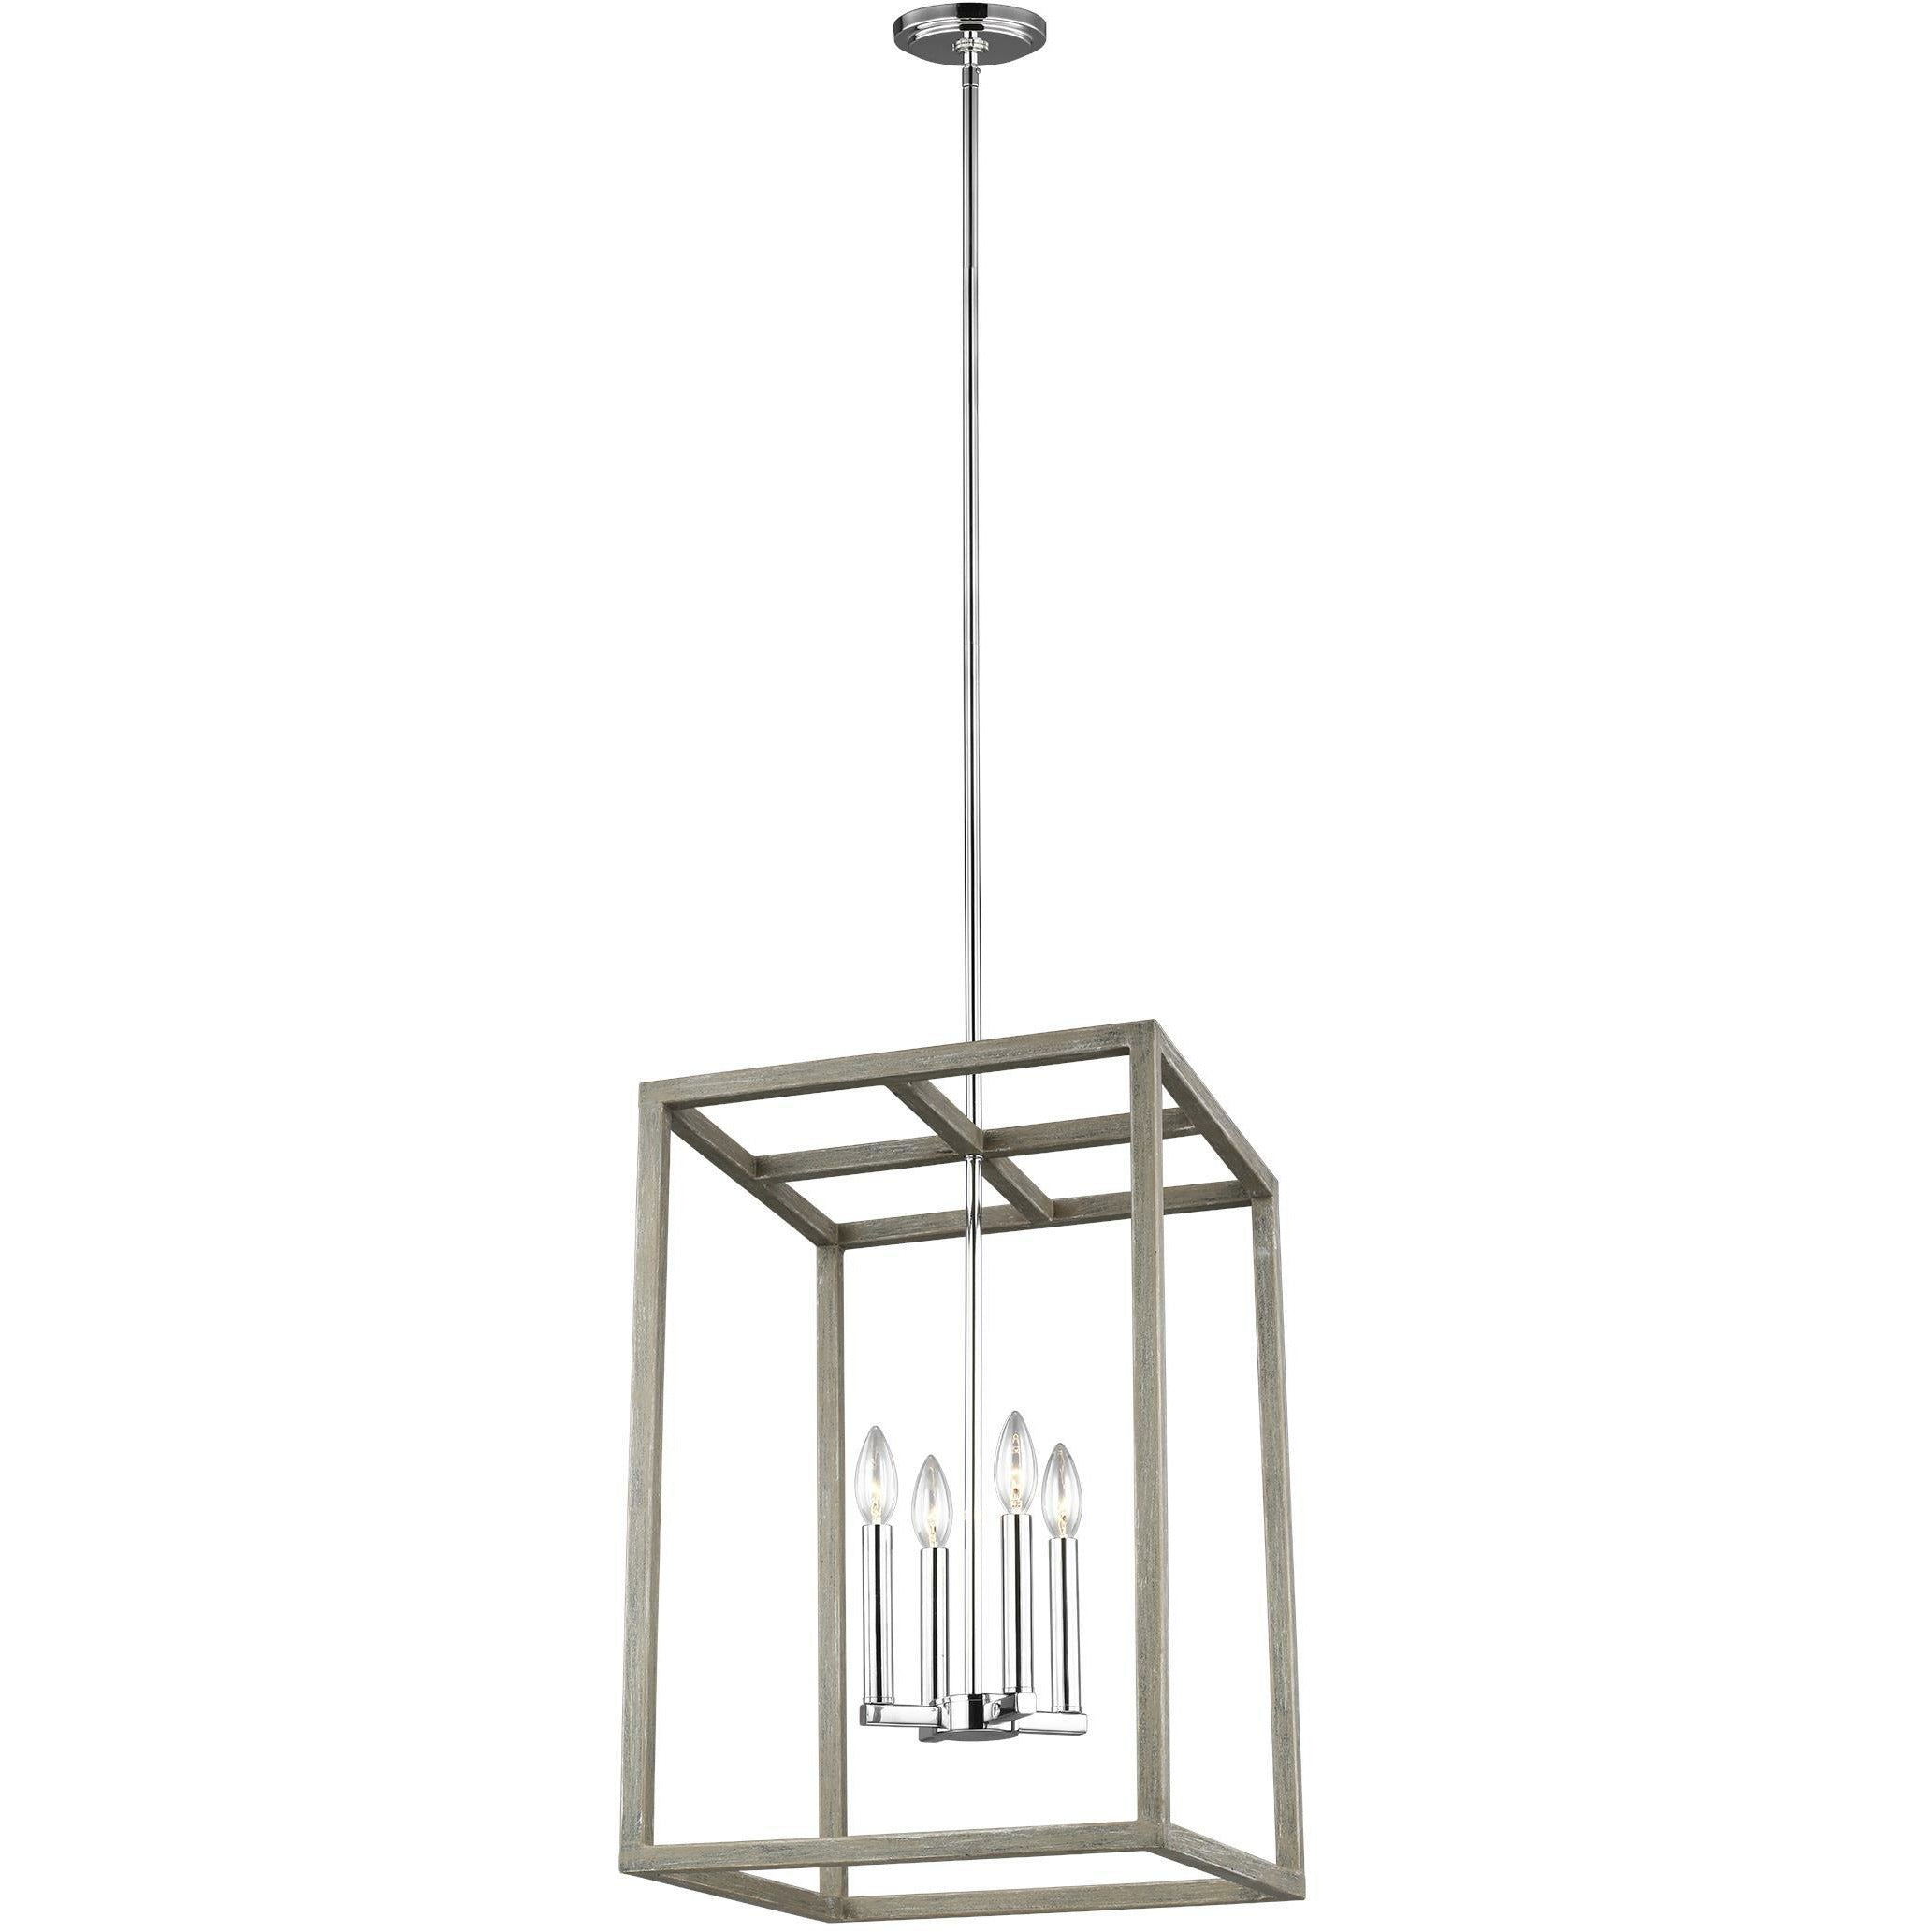 Moffet Street Pendant Washed Pine / Chrome